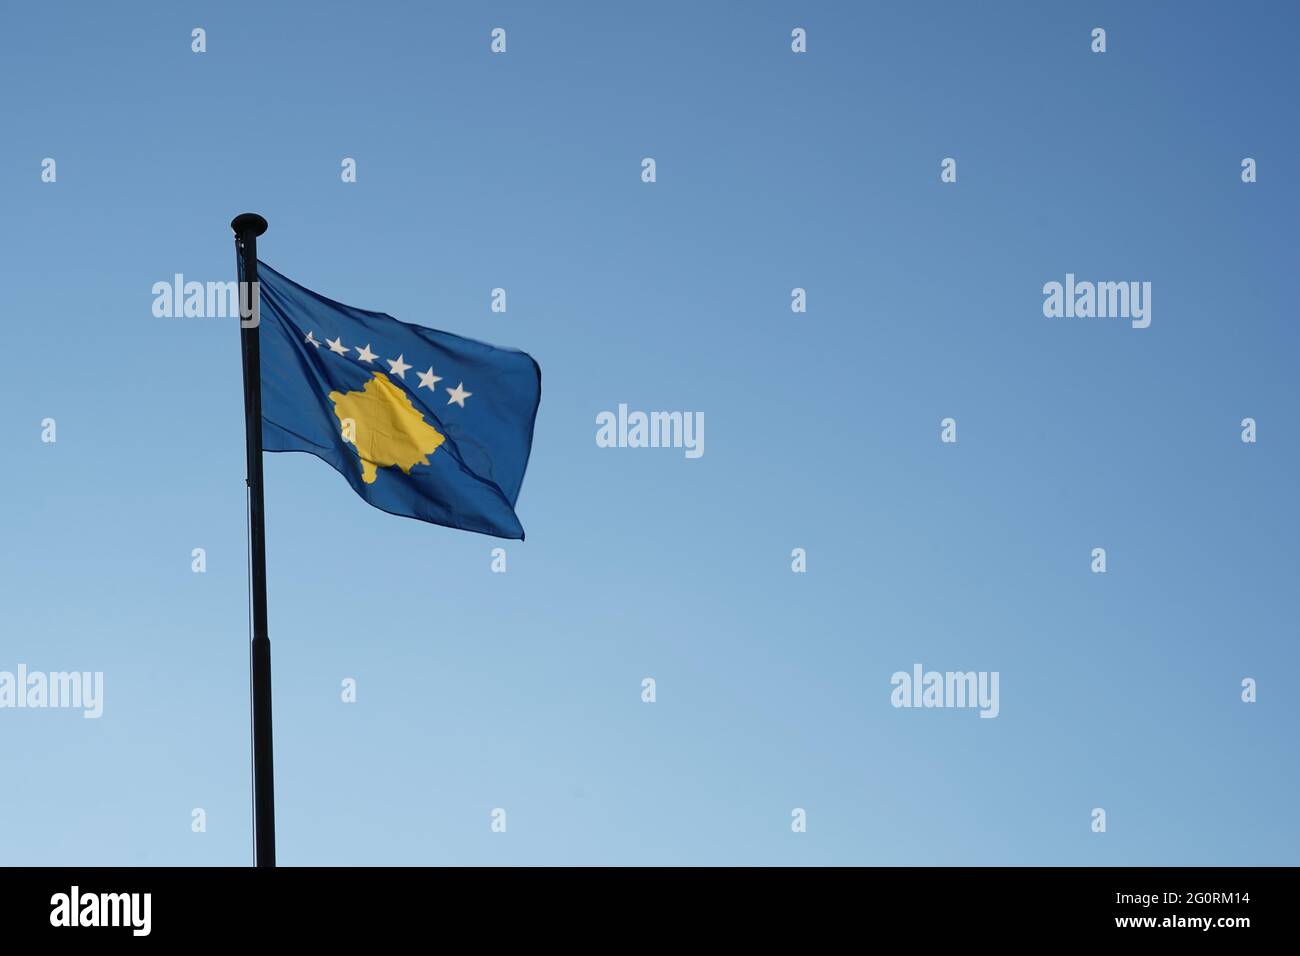 Kosovo flag hoisted on a flagpole waving in the wind. Low angle view against blue sky with plenty of copy space. Stock Photo